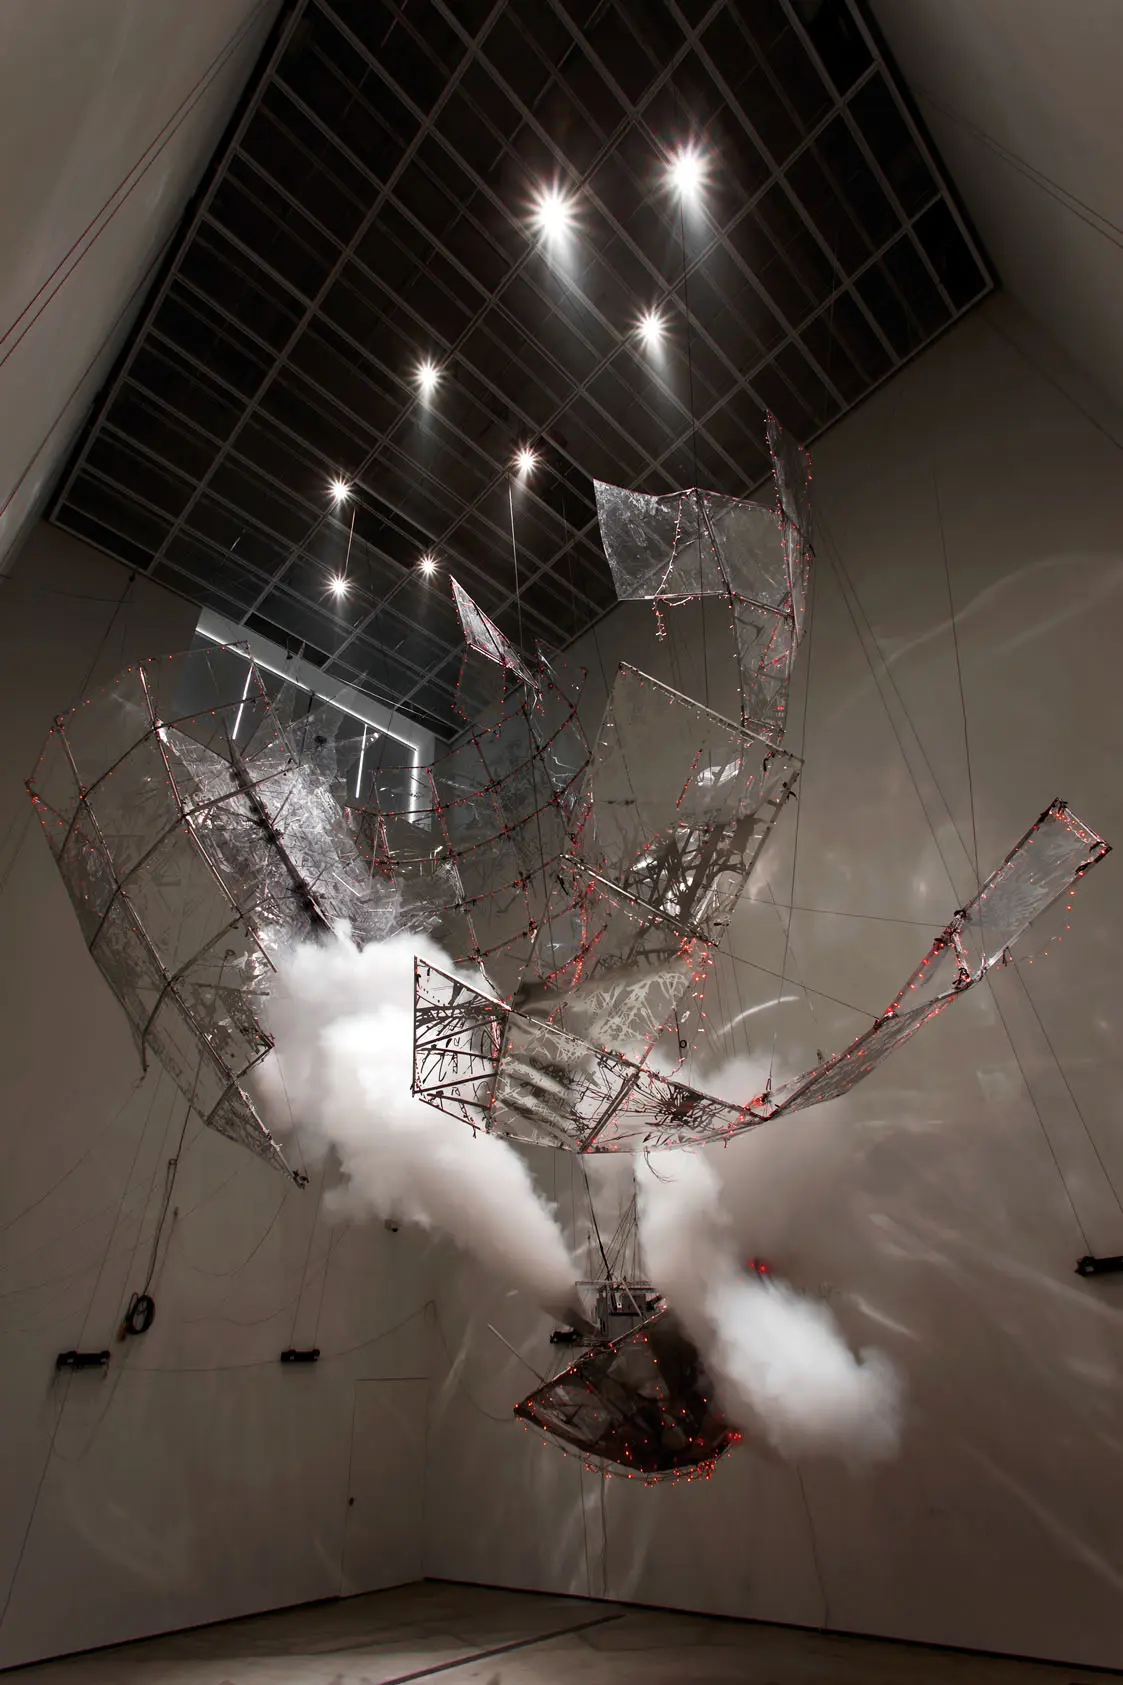 An art installation depicts transparent pieces resembling rocket parts hanging from a ceiling in a dimmed room. Smoke can be seen emanating from the grey nose cone of a rocket.